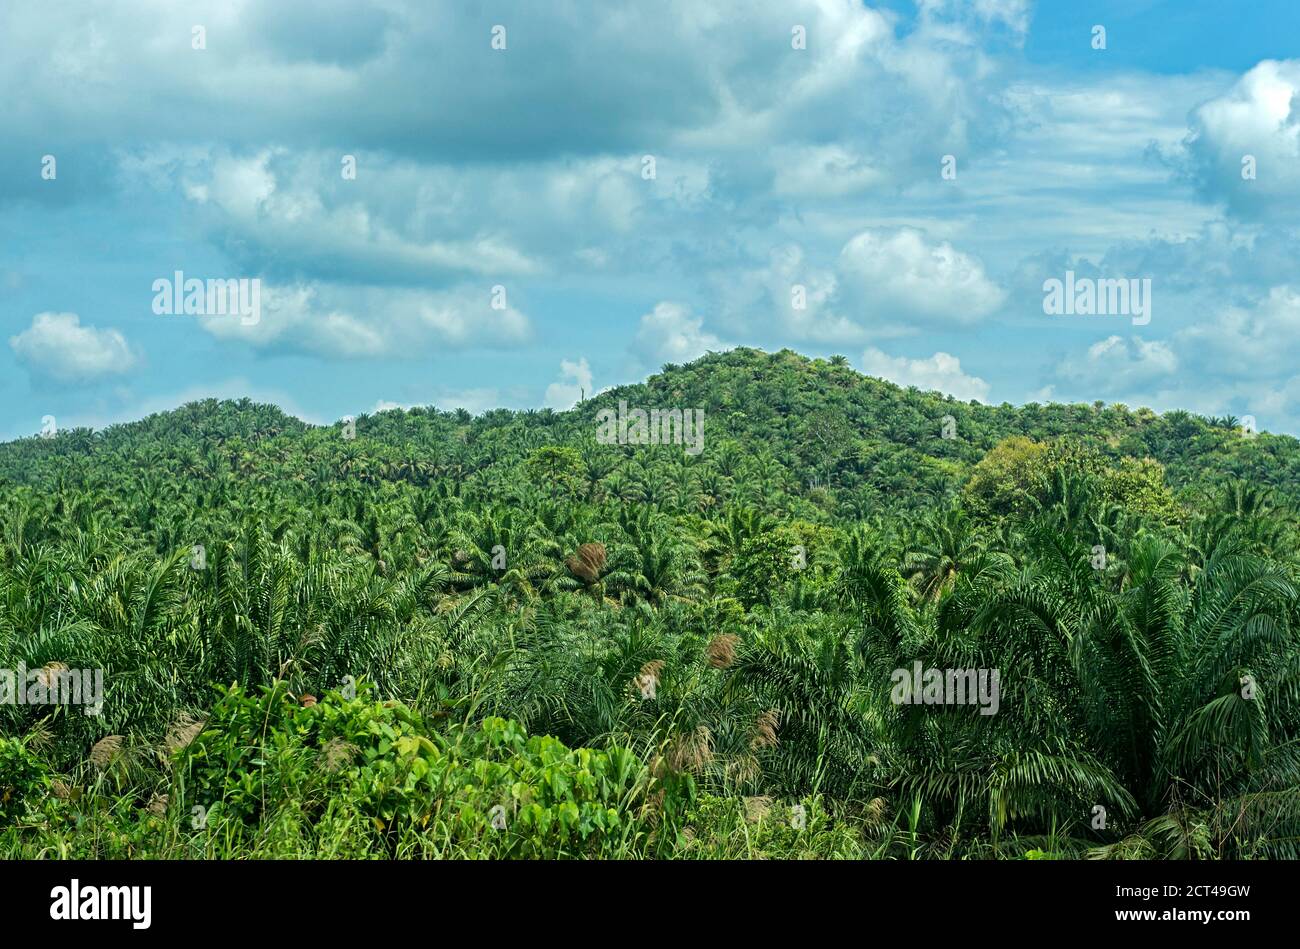 Commercial oil palm plantation in a former tropical rain-forest area, Sabah, Borneo, Malaysia Stock Photo